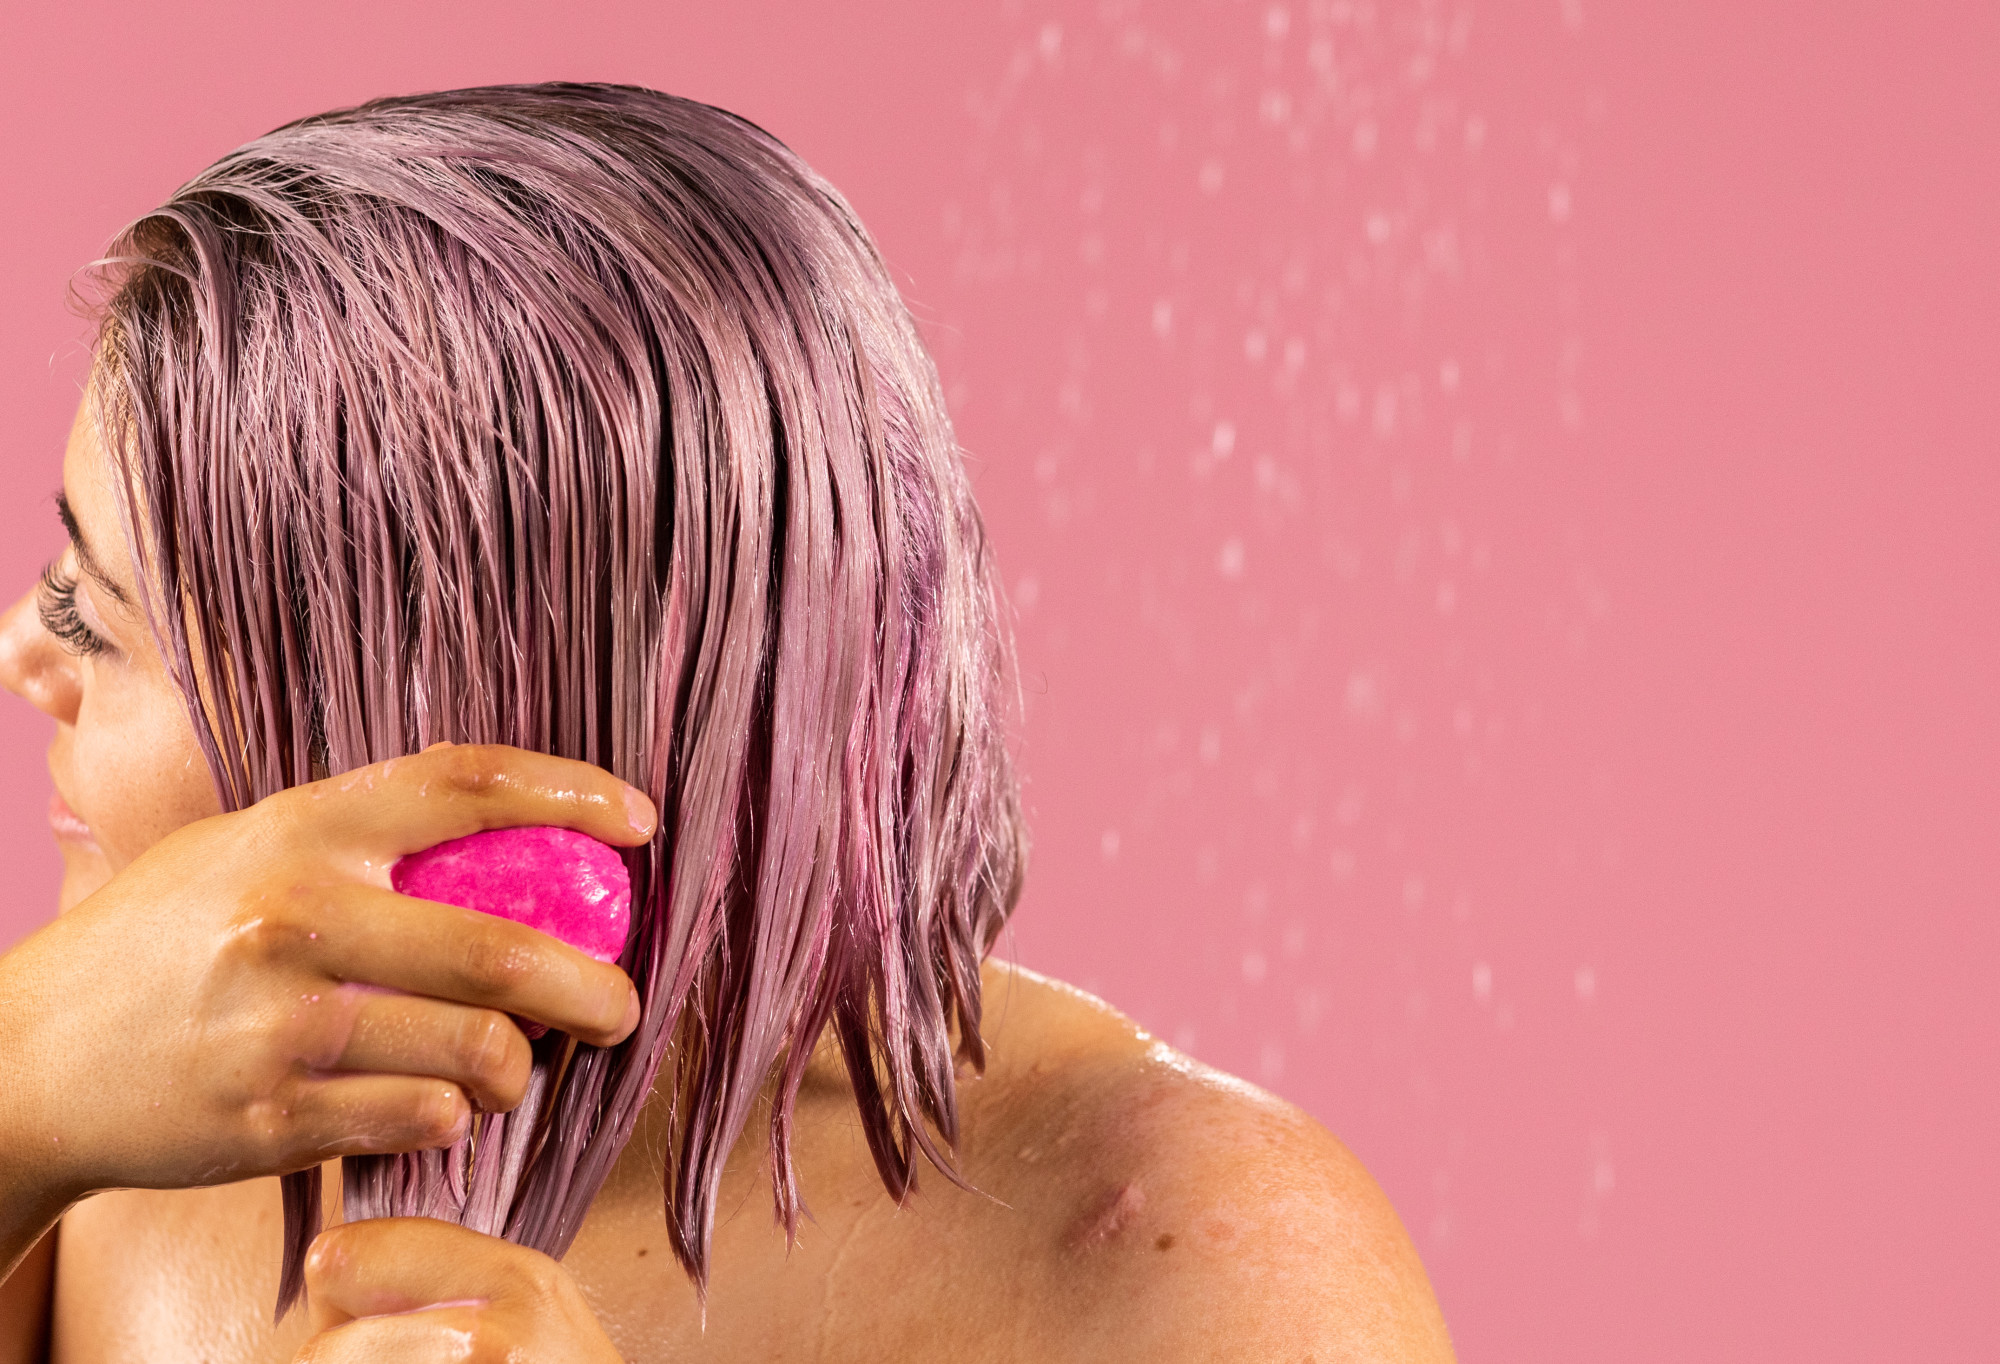 A person with bobbed pink hair works American Cream, a pink, oval shaped solid conditioner bar, through their hair.